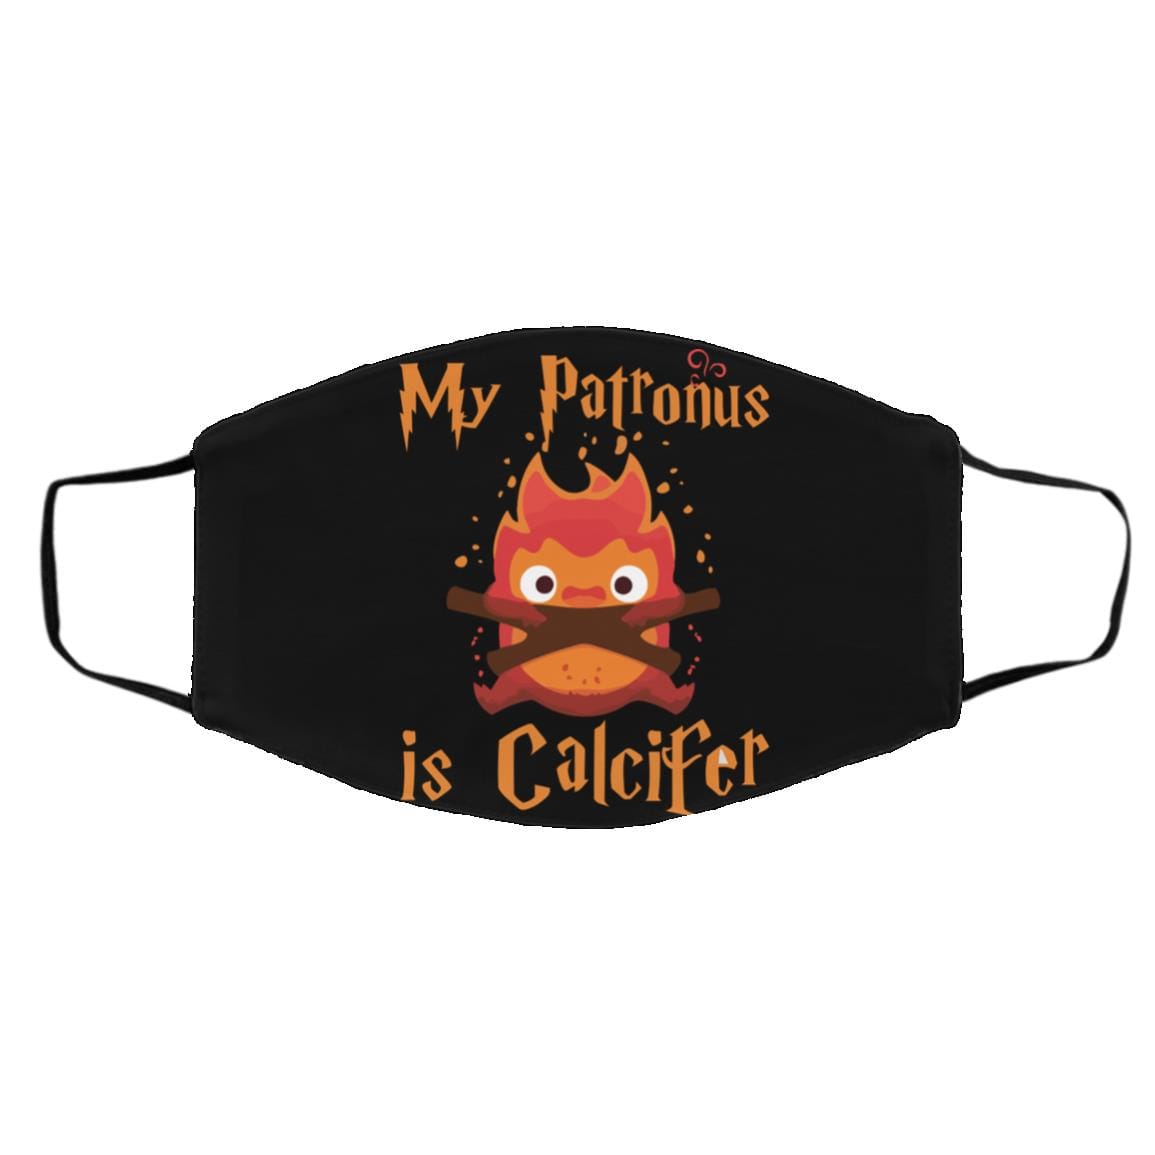 Howl’s Moving Castle – My Patronus is Calcifer Face Mask